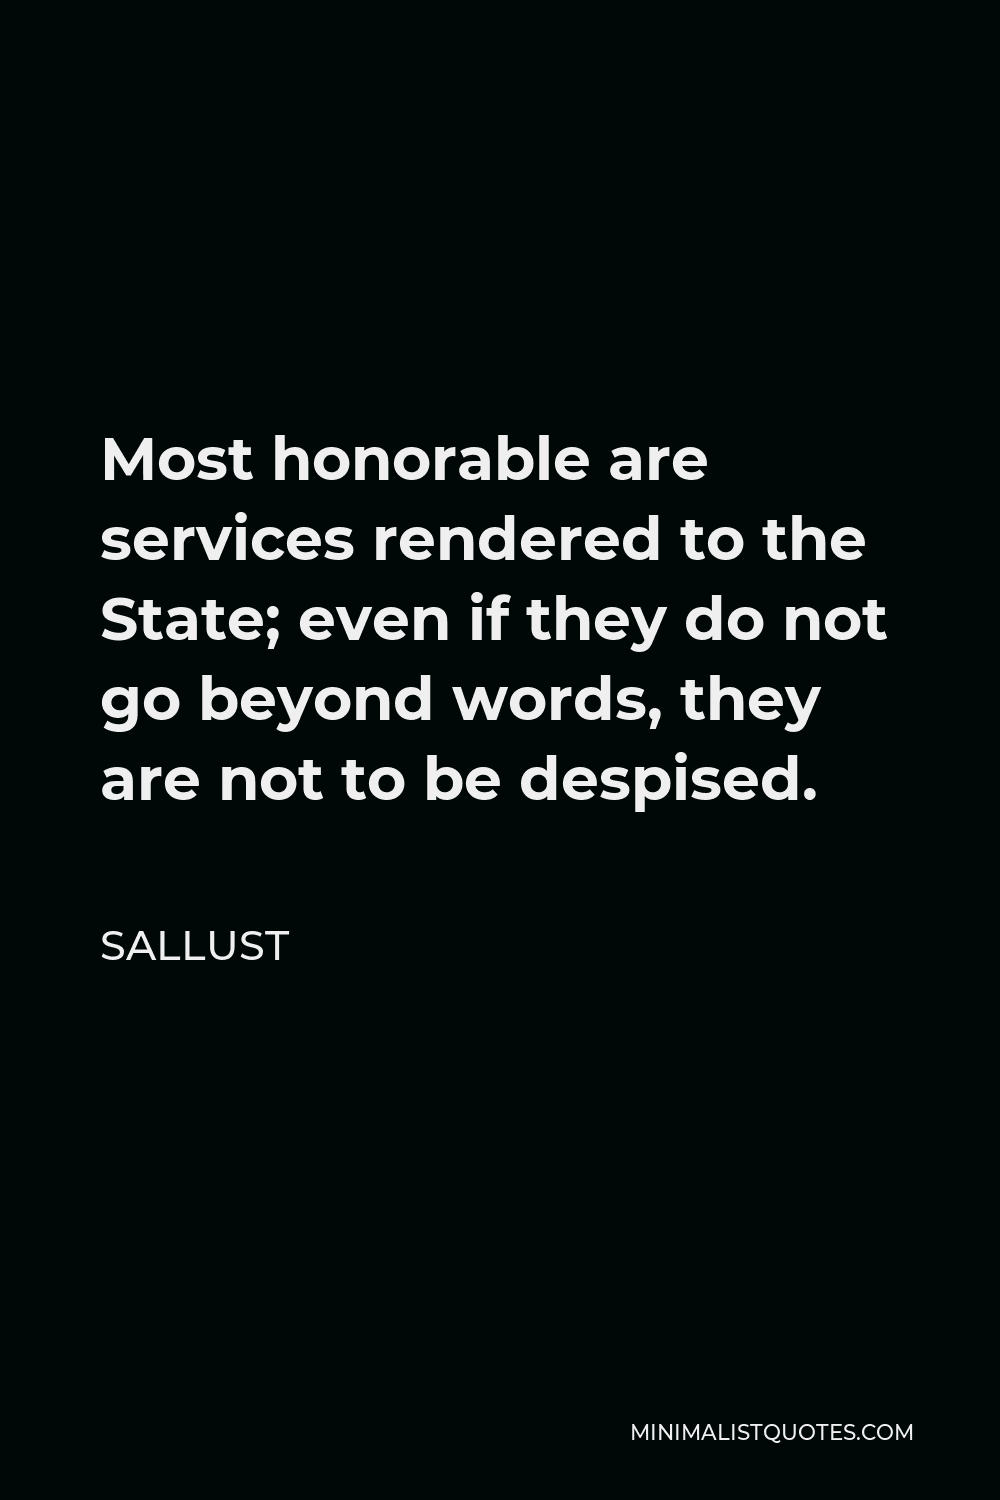 Sallust Quote - Most honorable are services rendered to the State; even if they do not go beyond words, they are not to be despised.